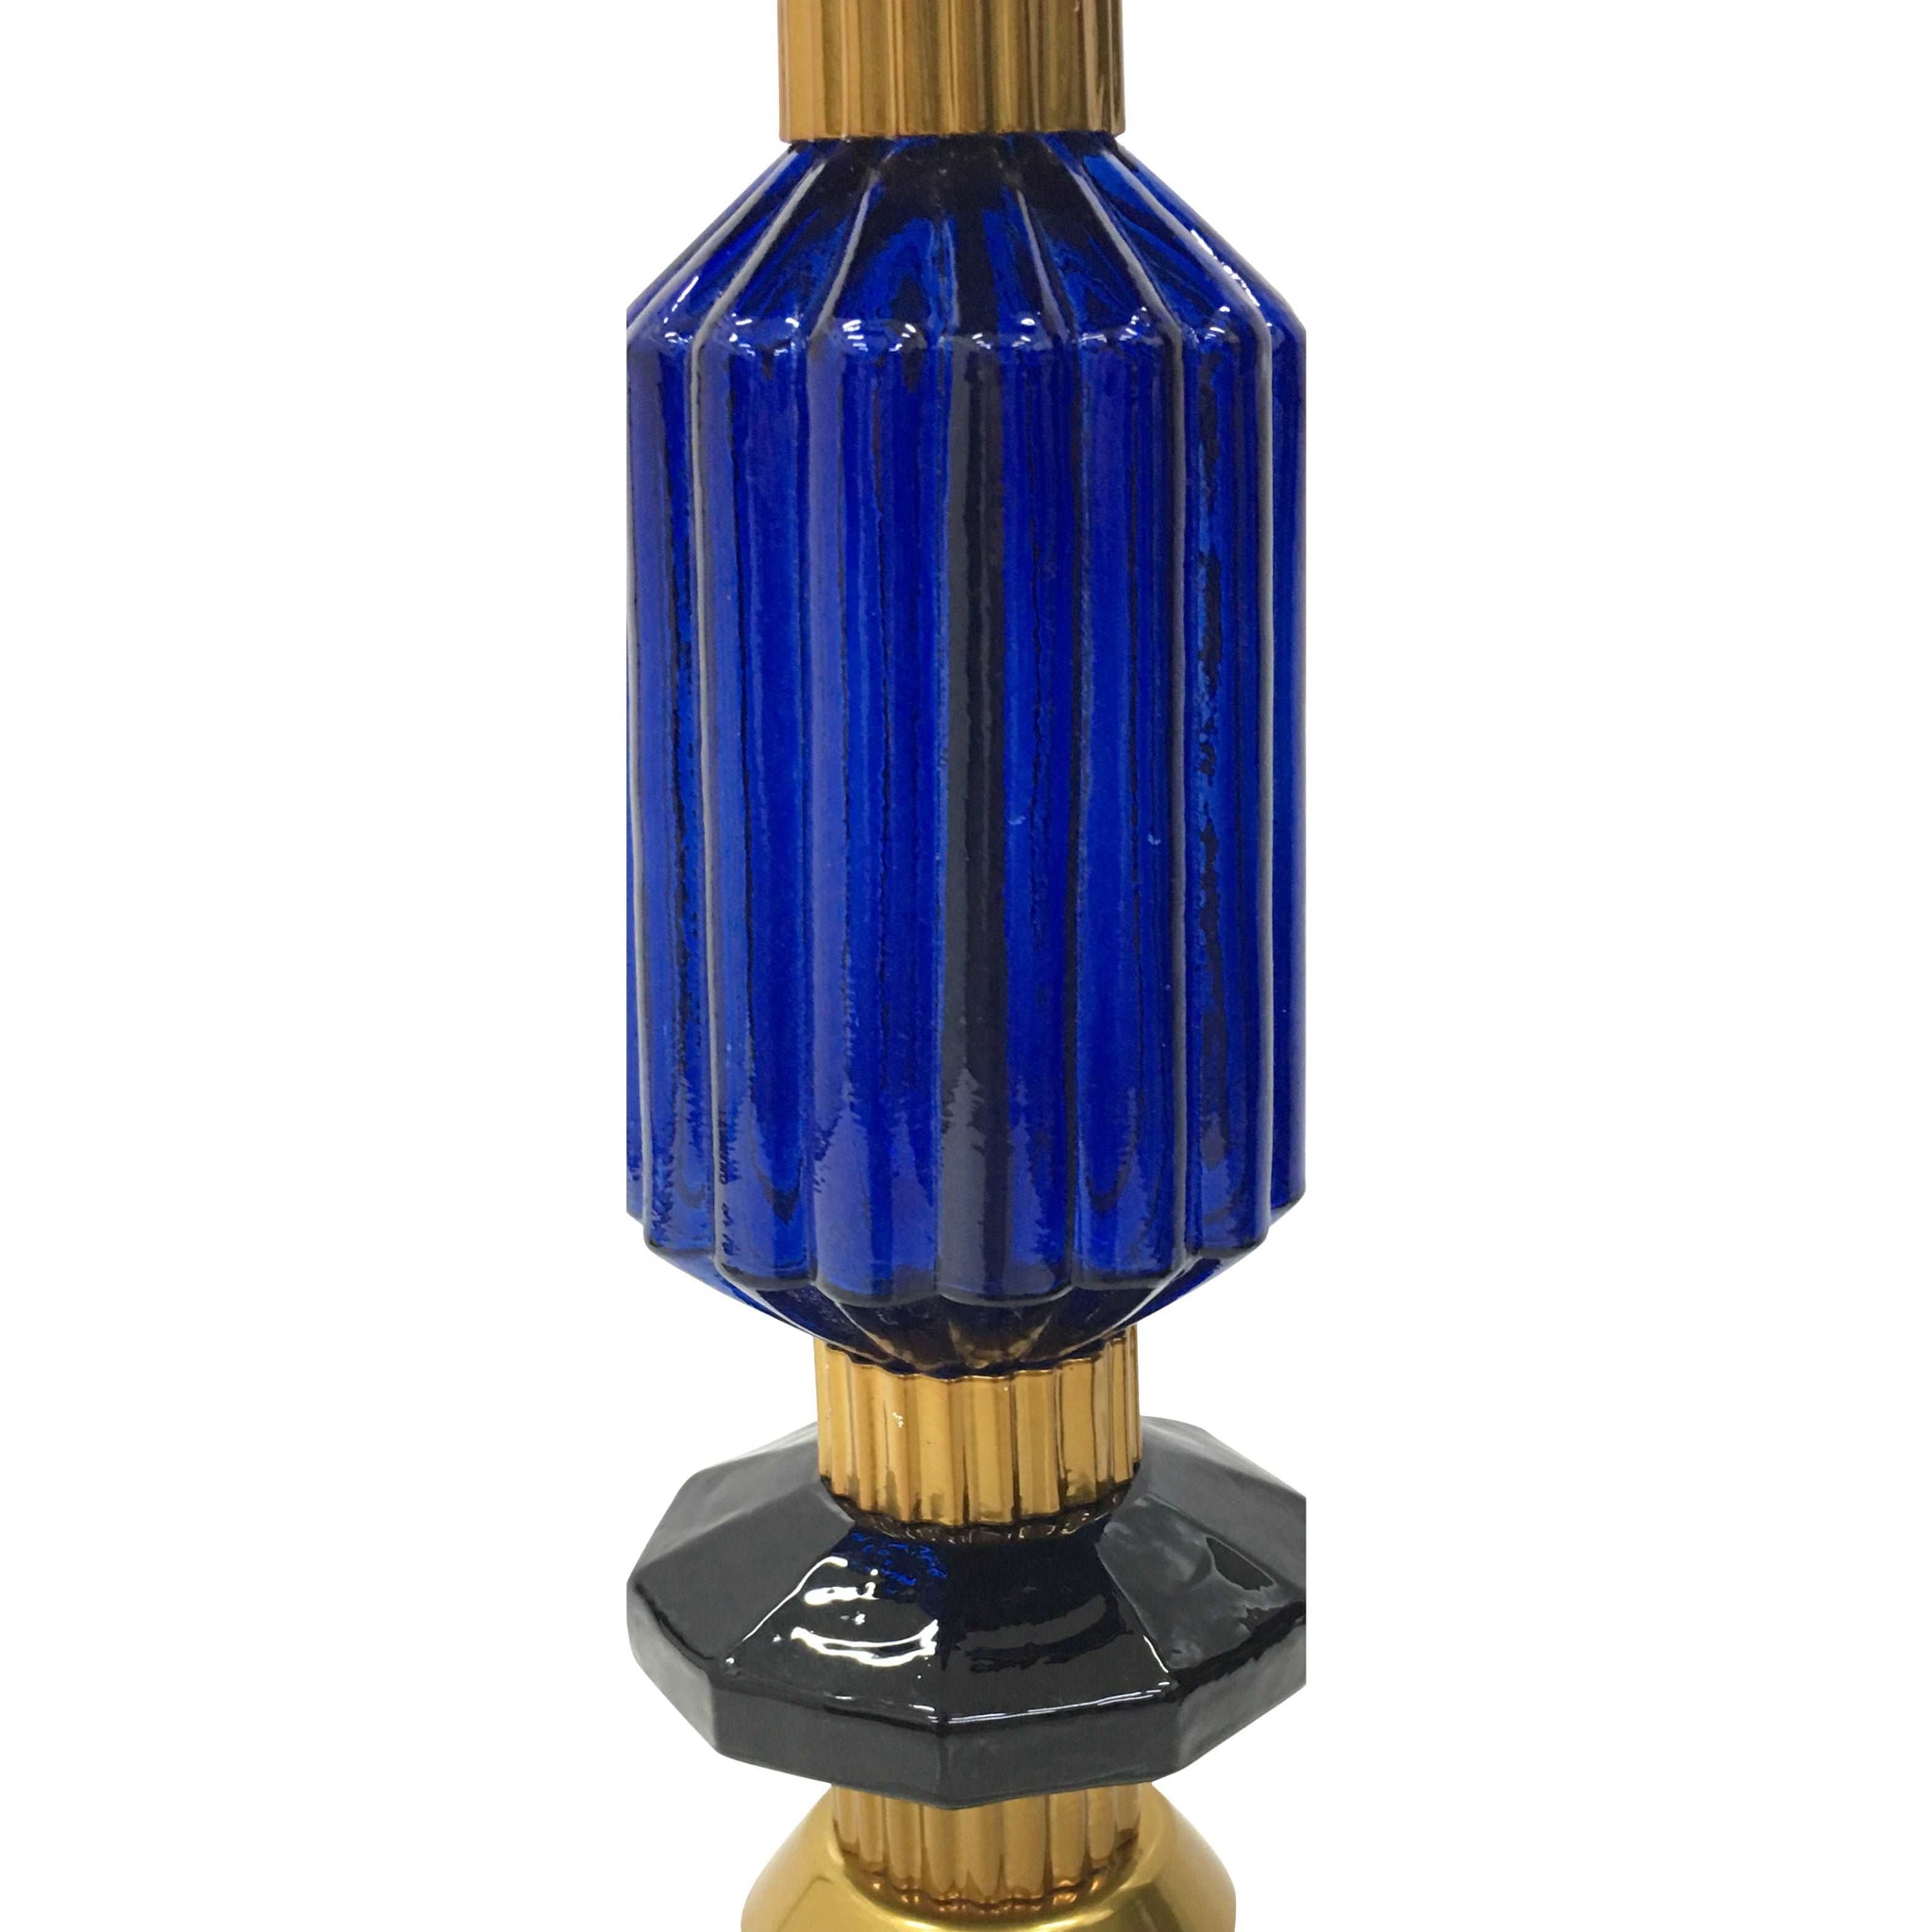 Arenal Ink blue and frosted glass pendant E27 60W